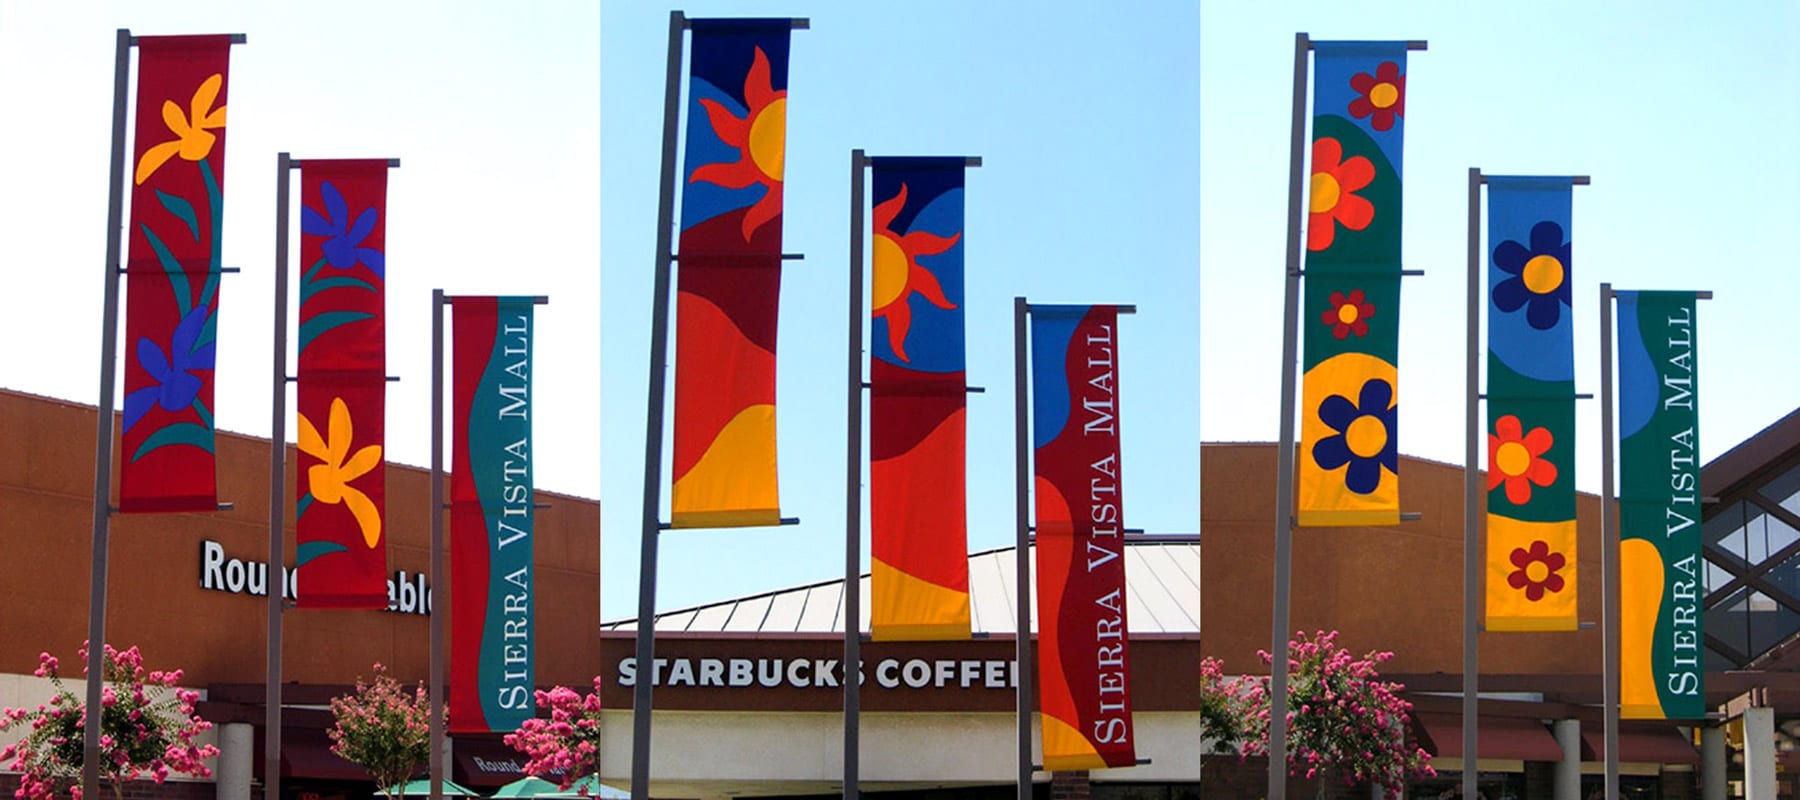 Banners at mall